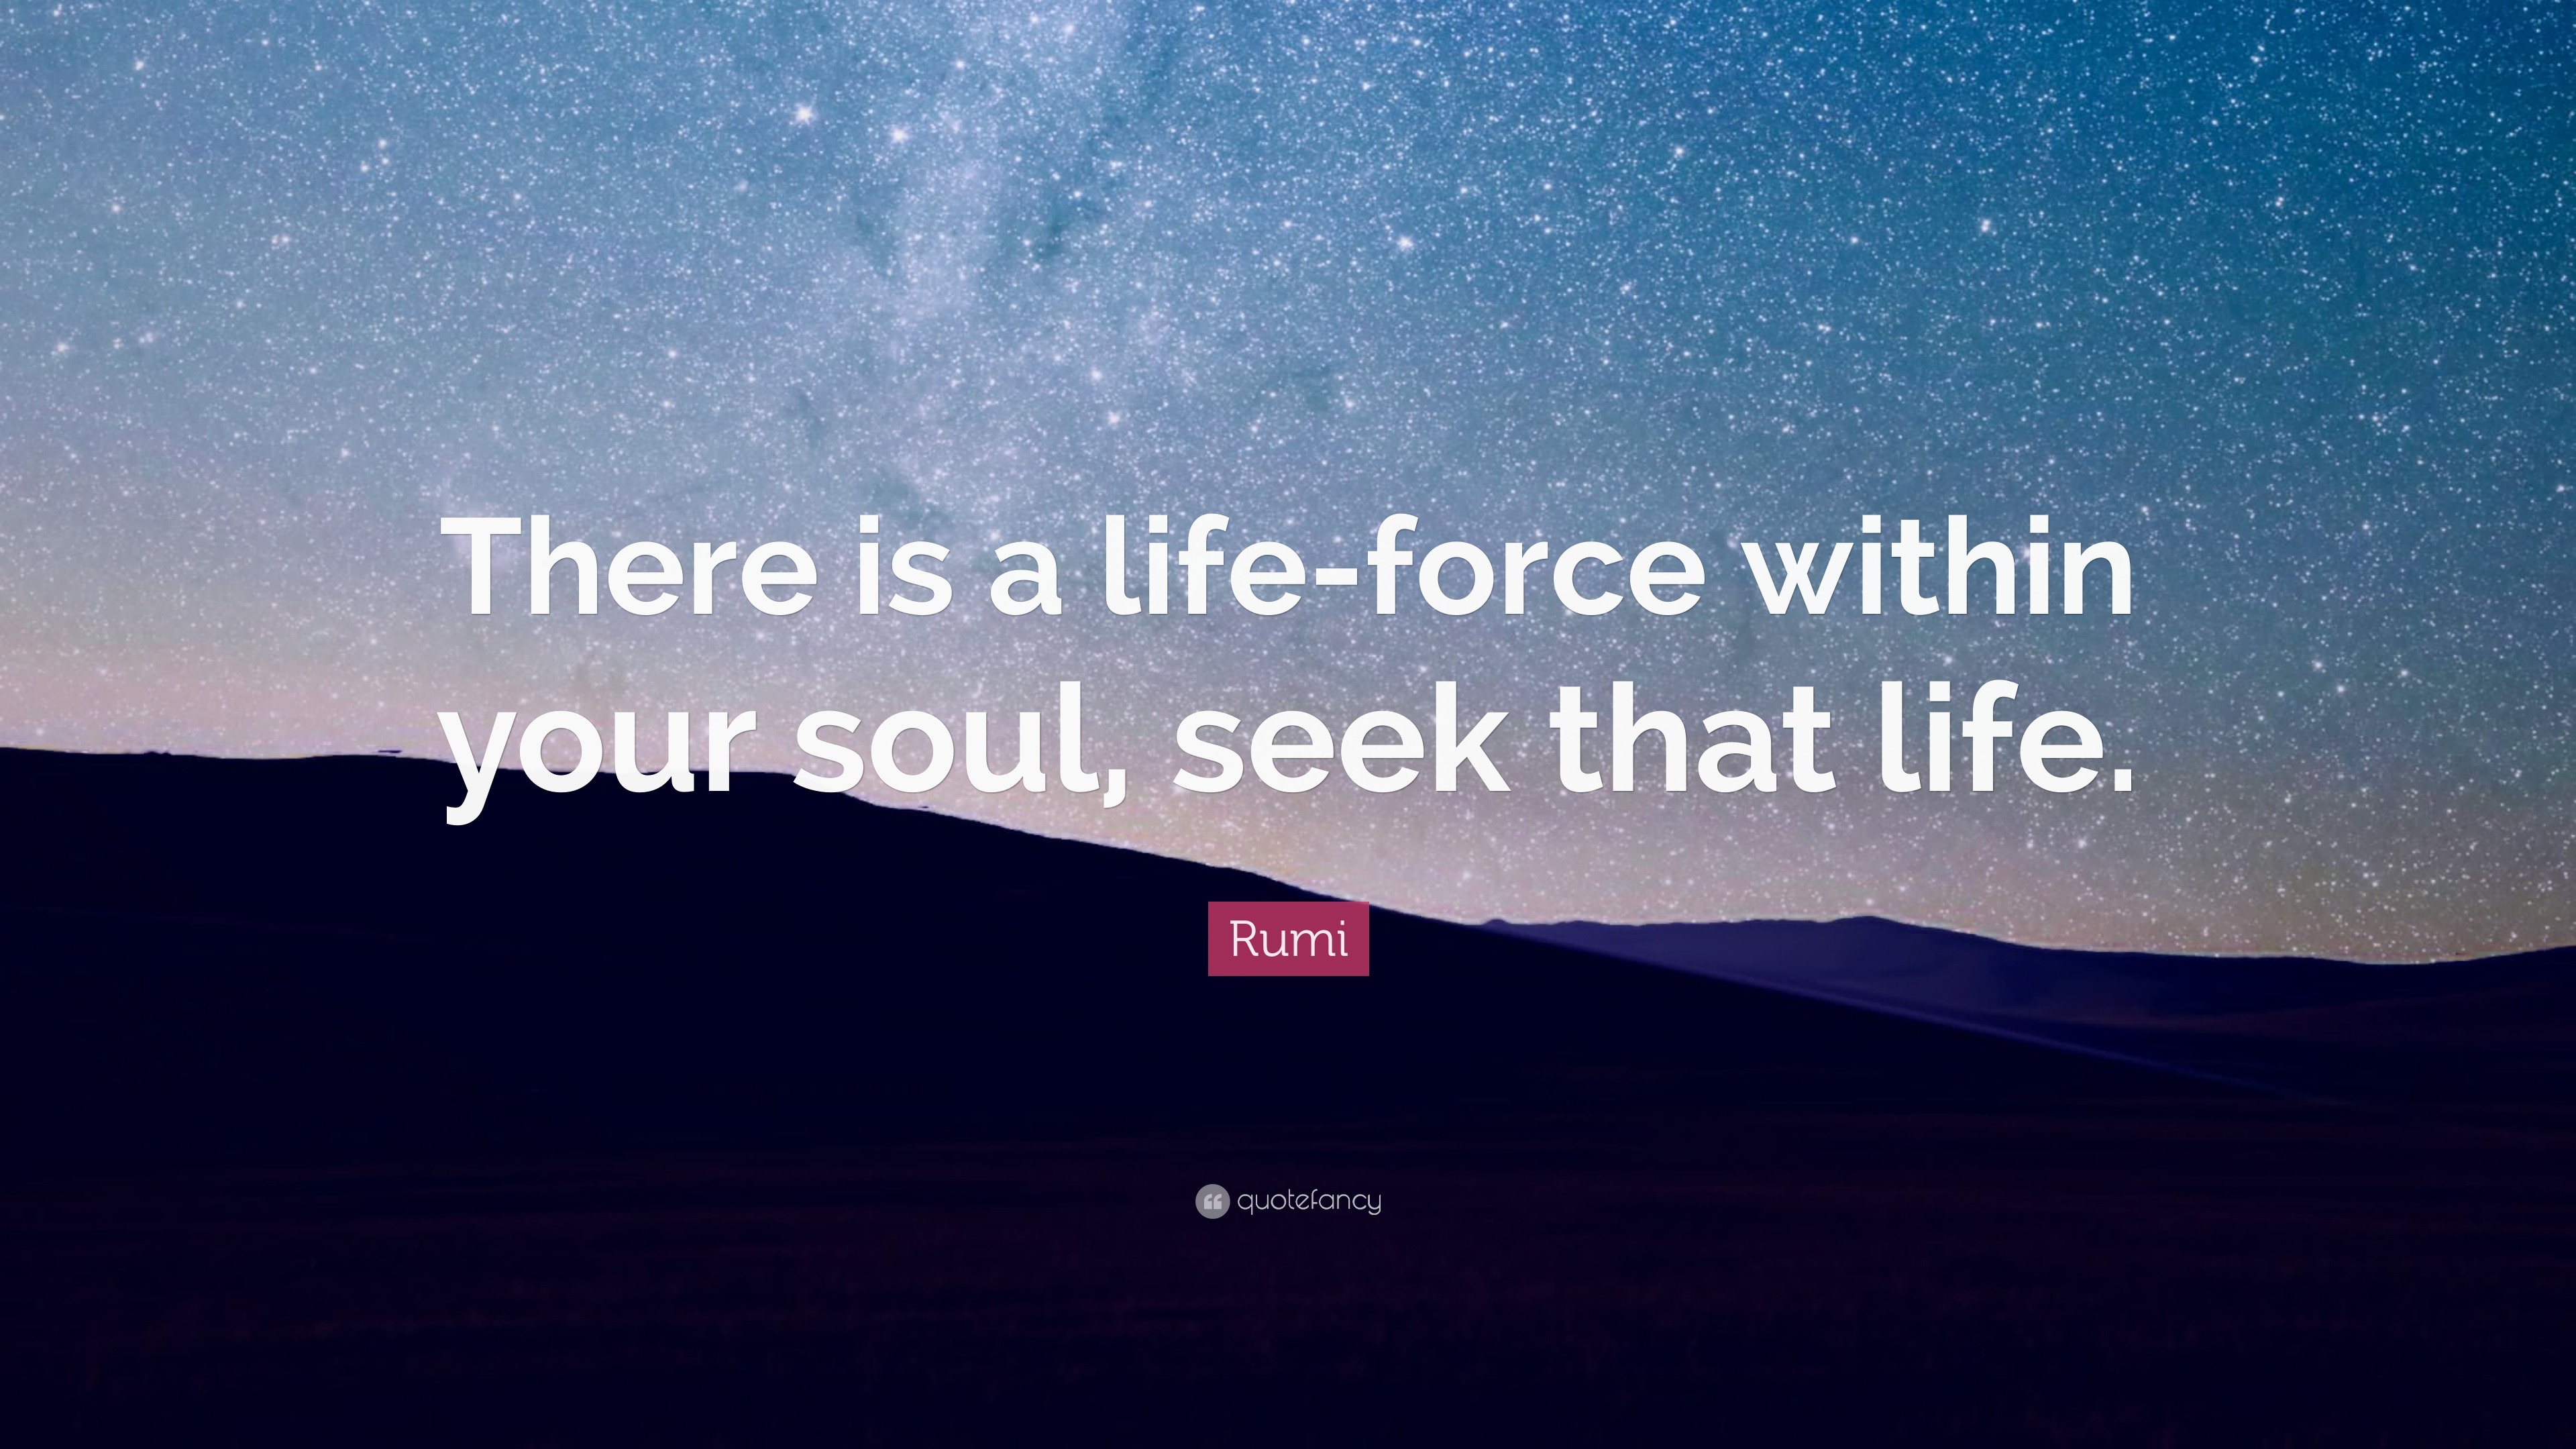 Rumi Quote: “There is a life-force within your soul, seek that life.”